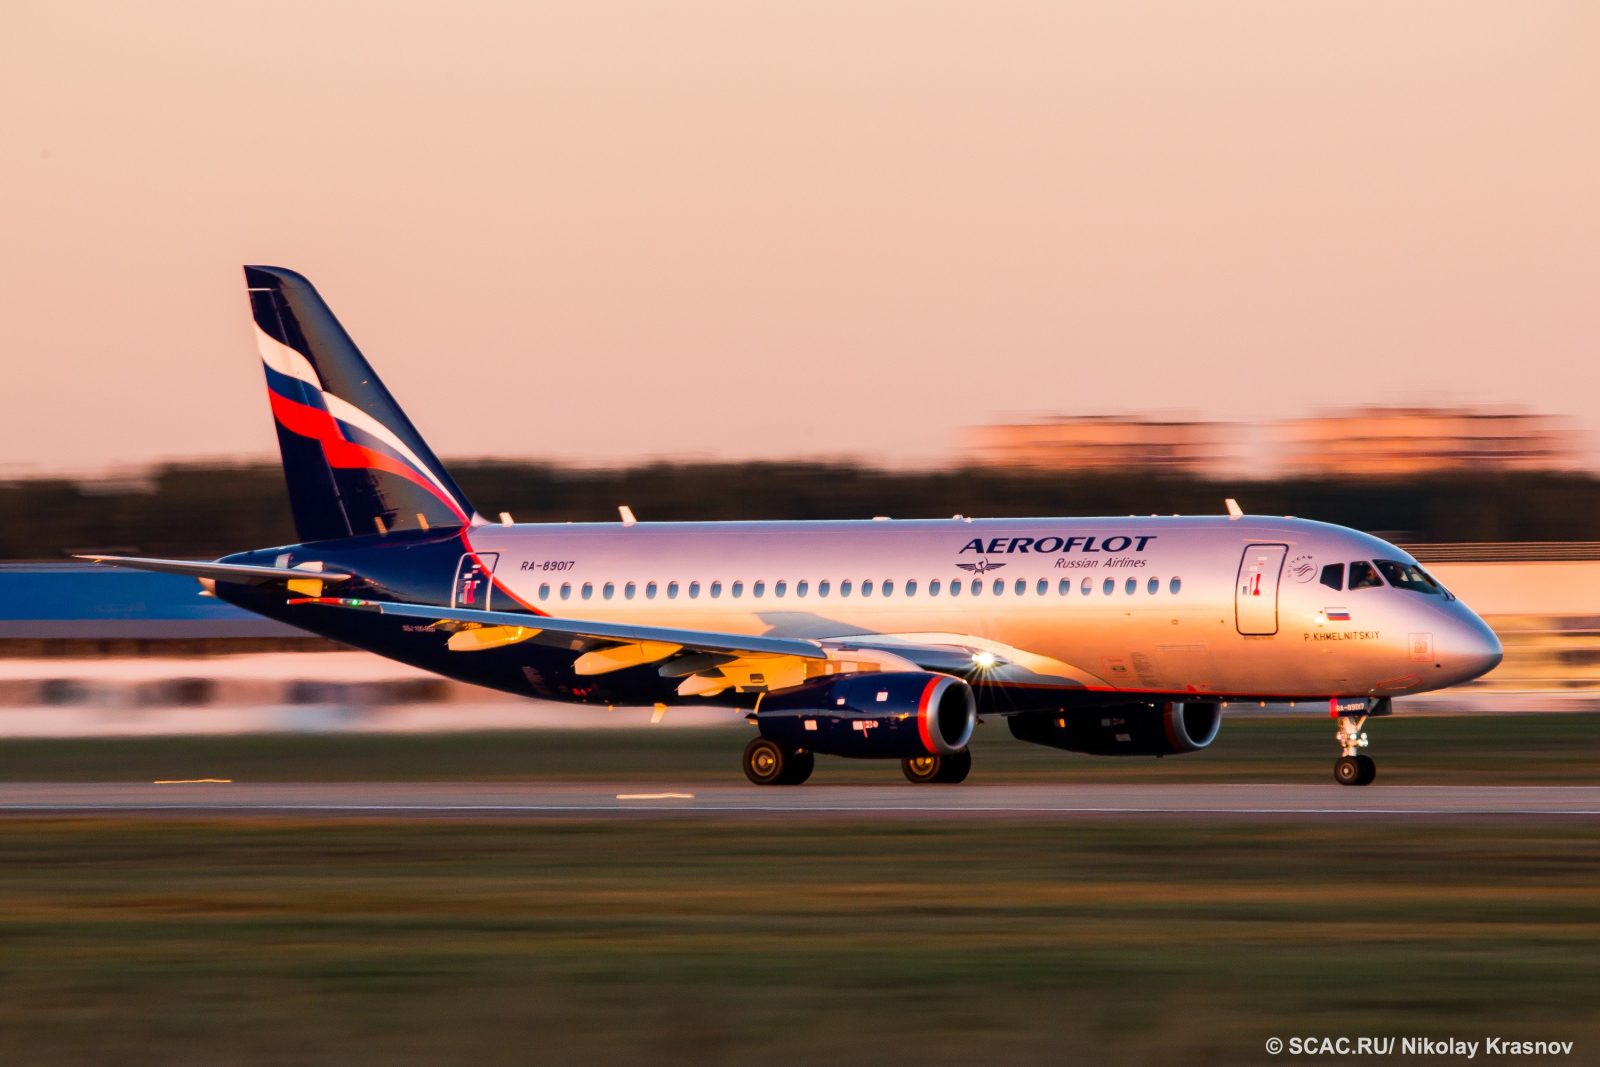 Another Aeroflot Sukhoi Superjet 100-95 is Involved in a Serious Incident... Time to Ground it?